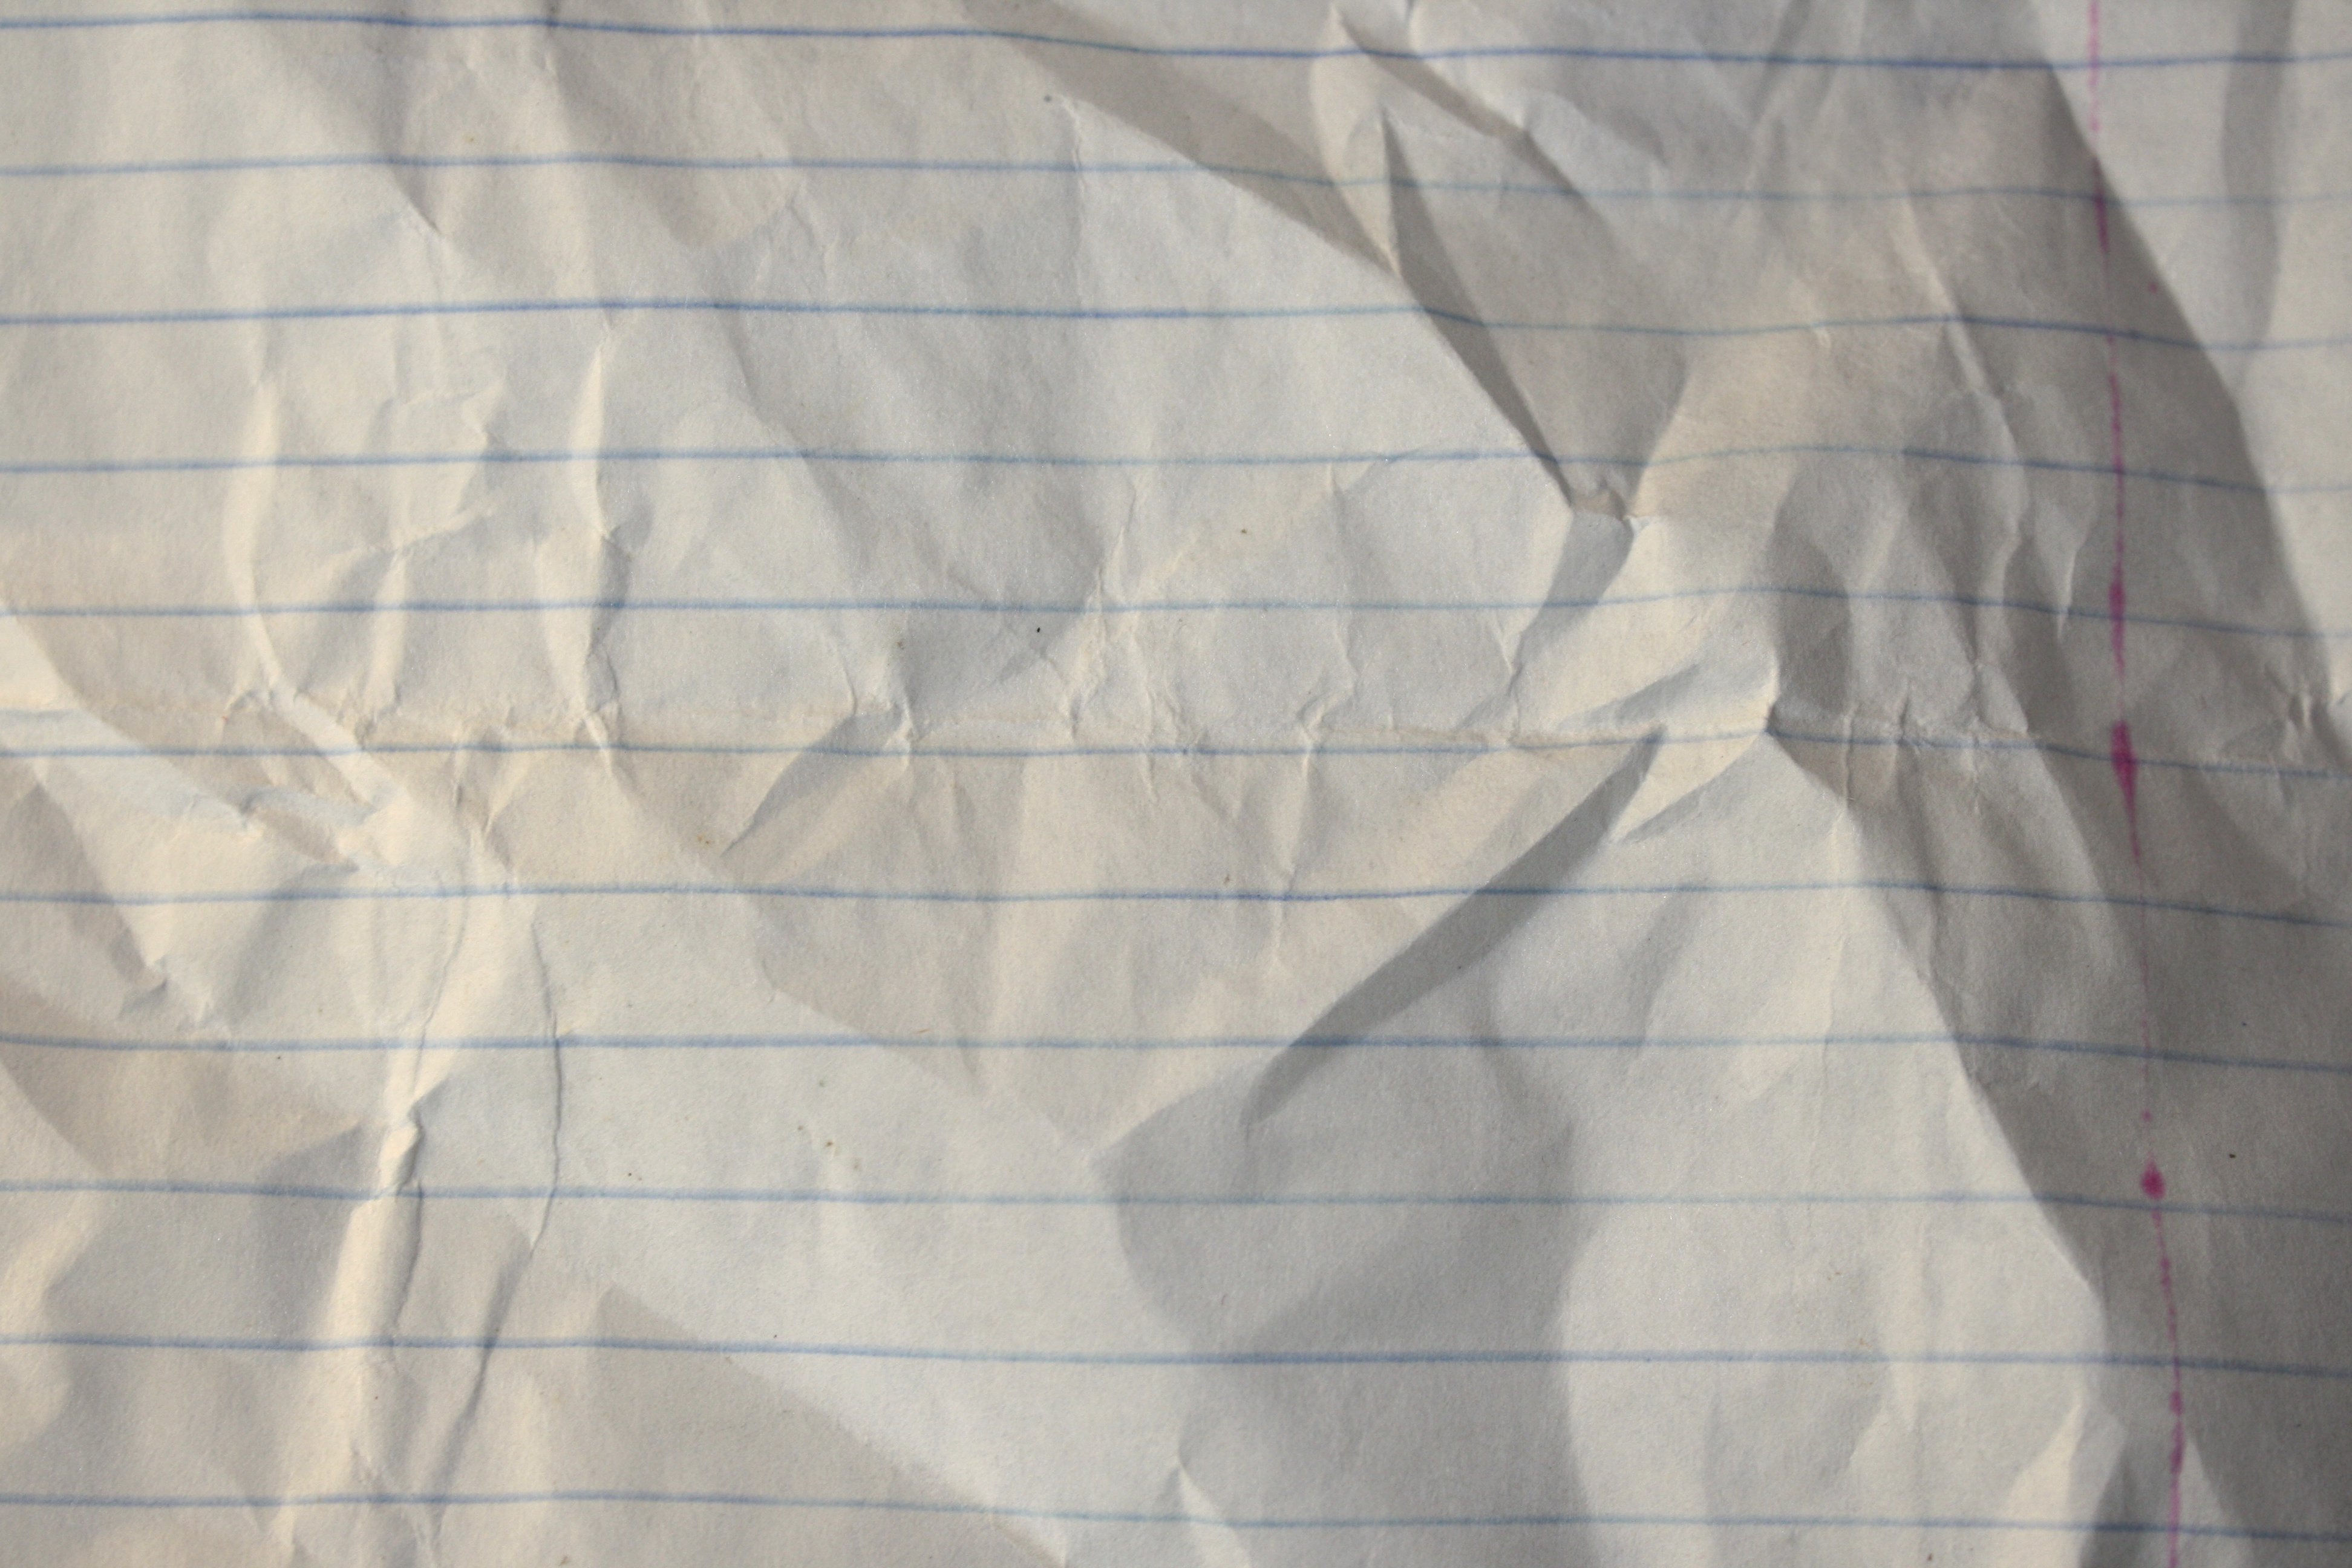 Free Notebook Paper Texture